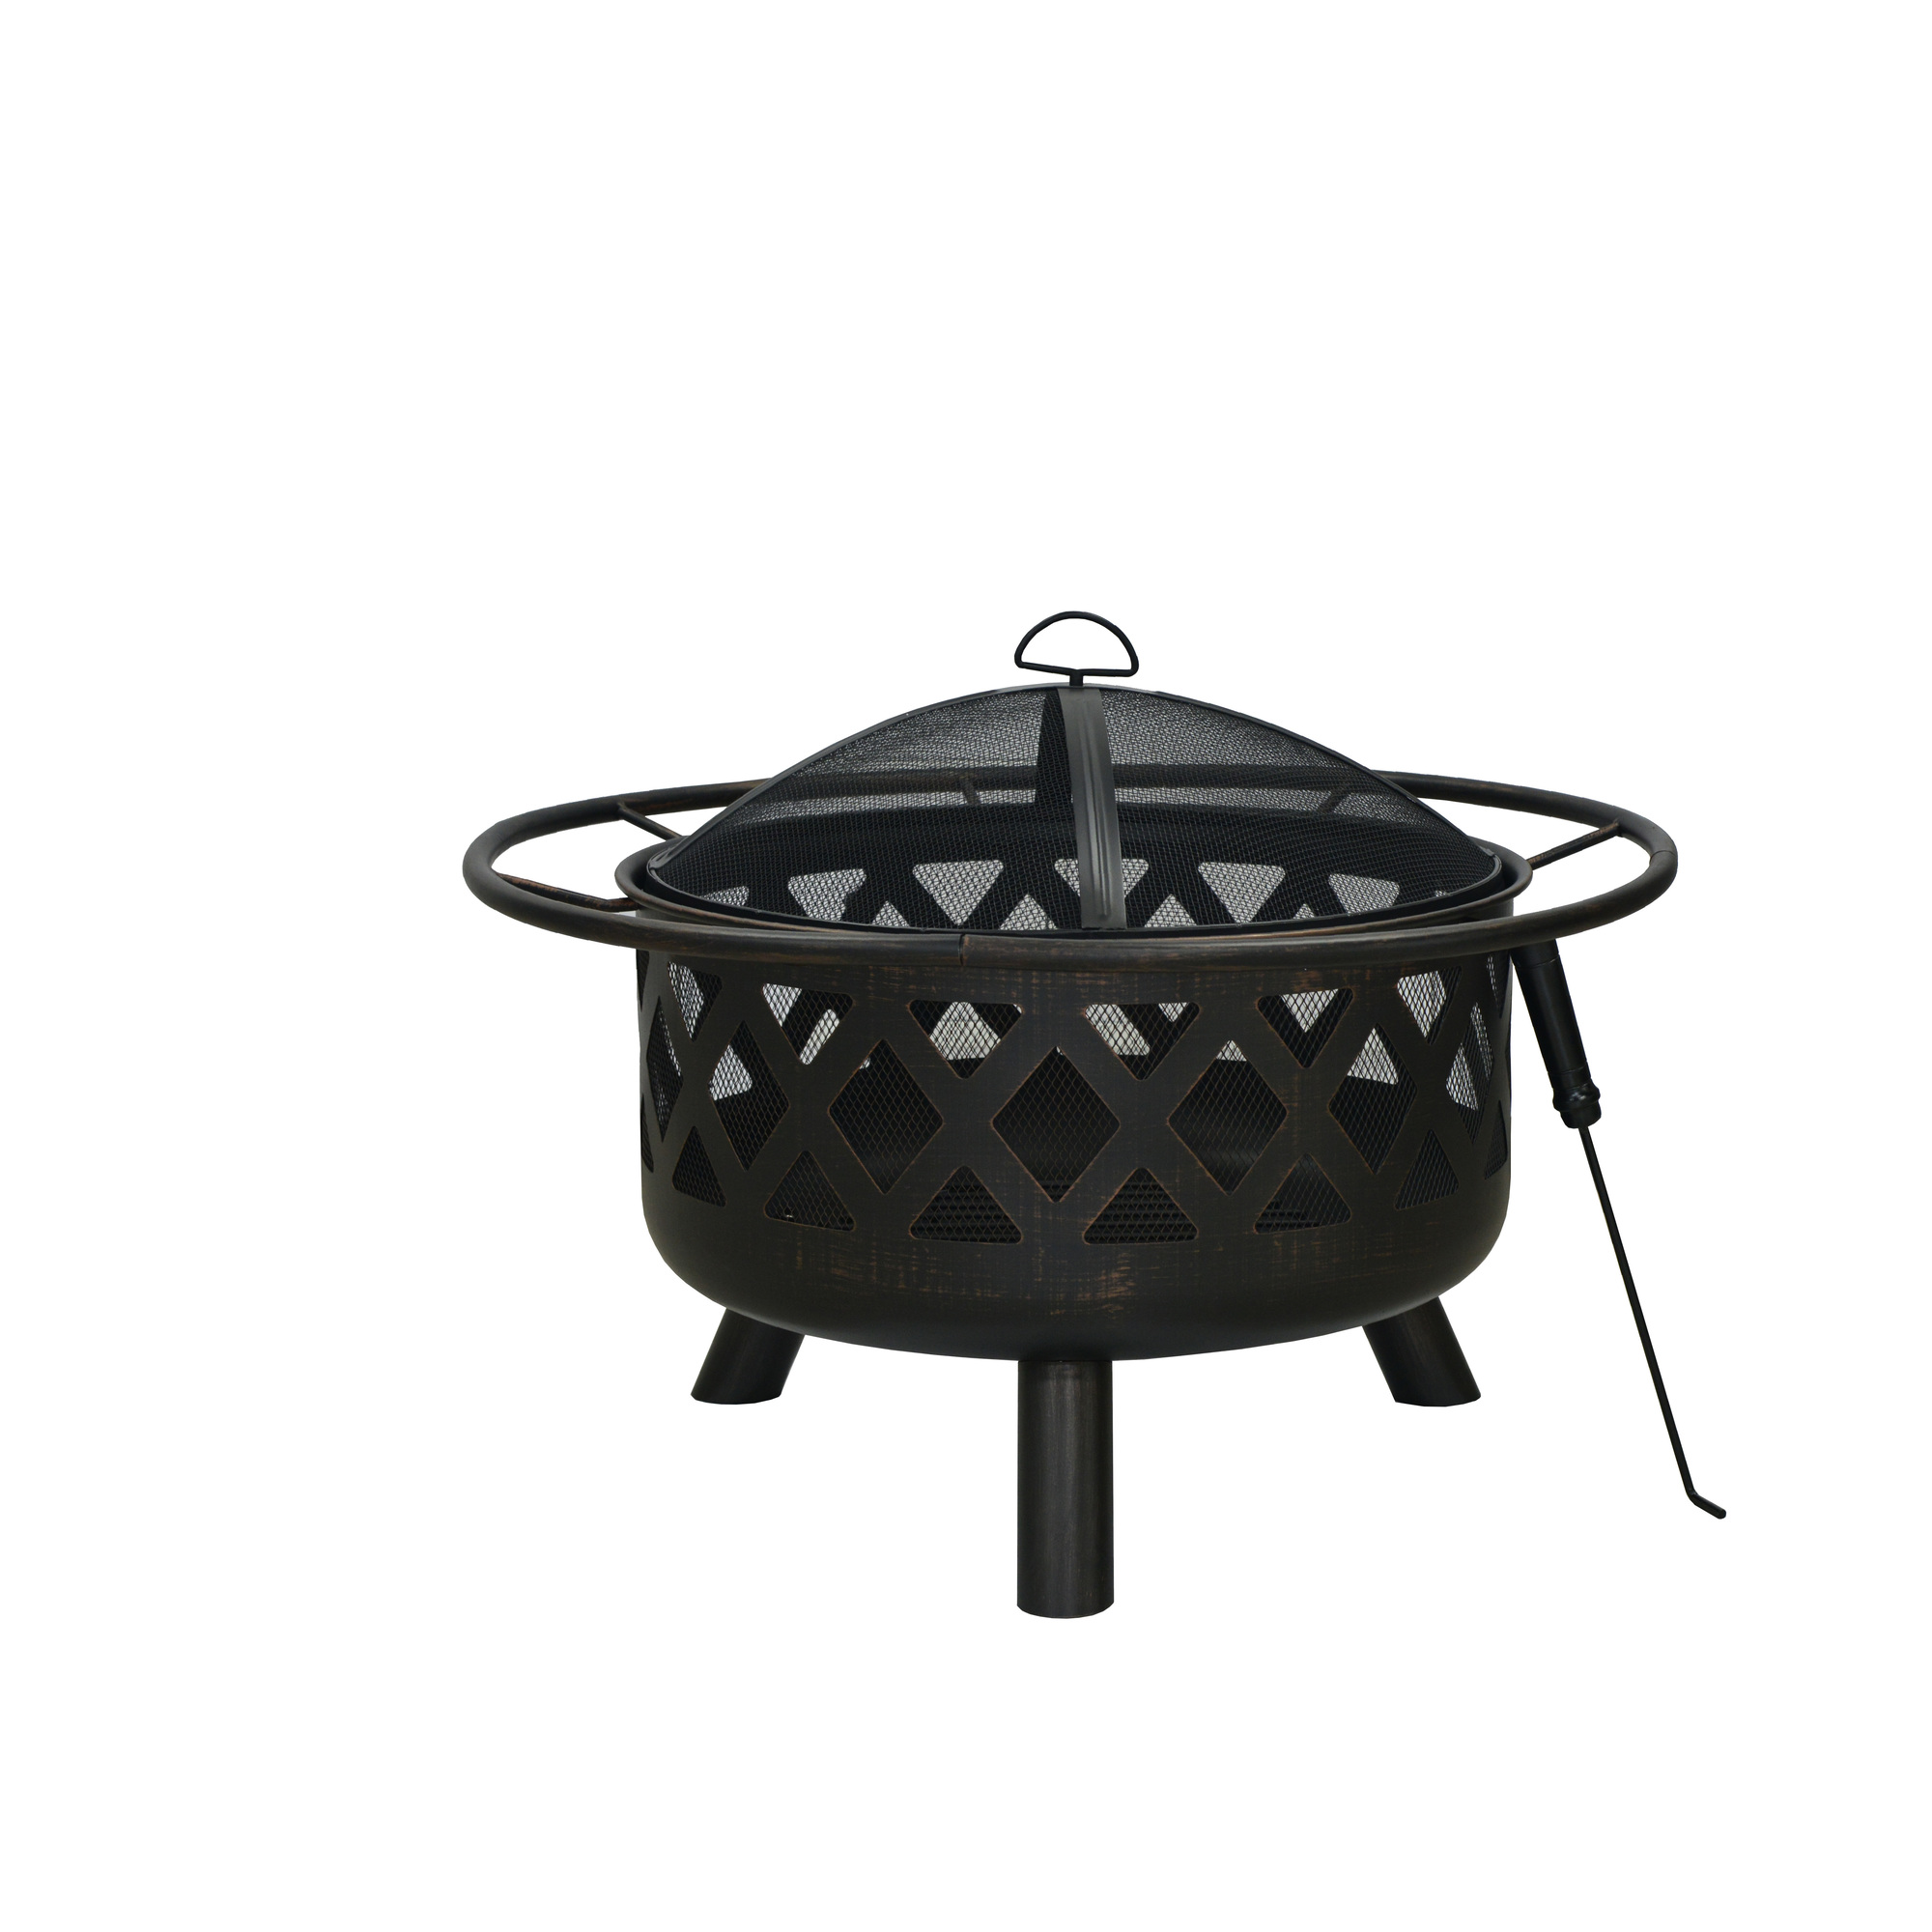 Bond, Crofton 32Inch Round Steel Fire Pit, Fuel Type Wood, Diameter 32 in, Material Combination, Model 52121